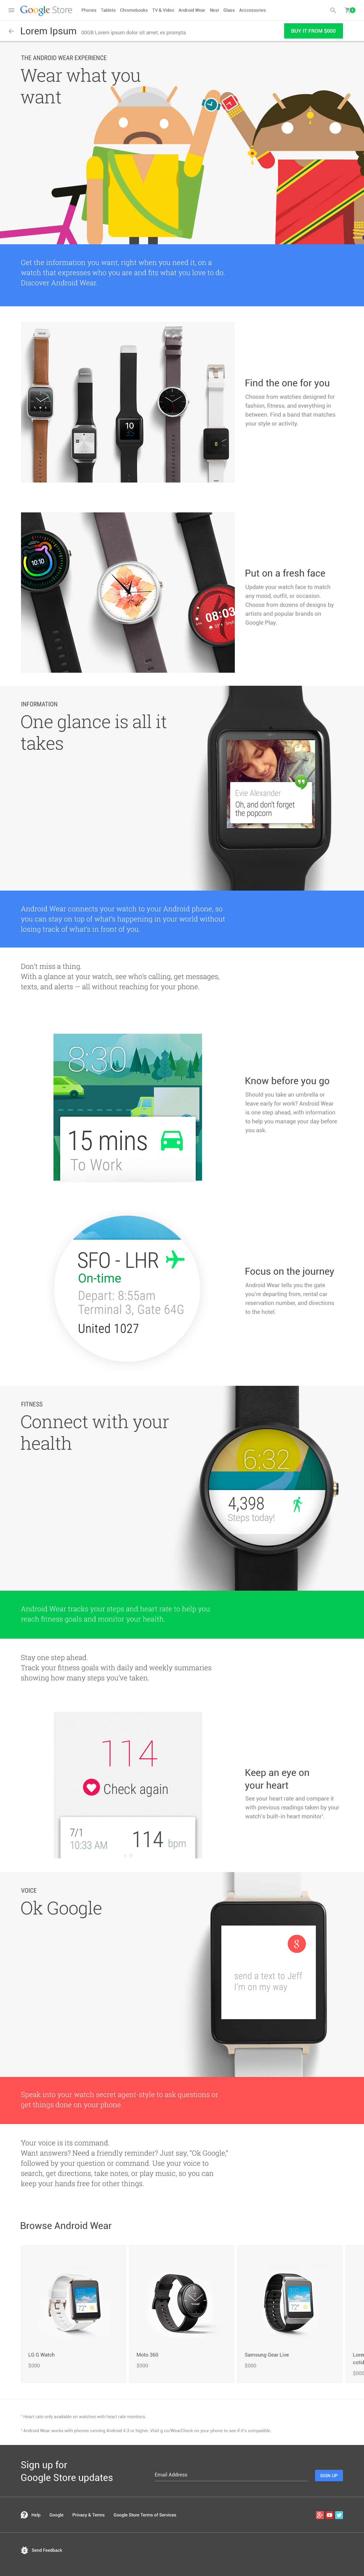 Android Wear Platform Story